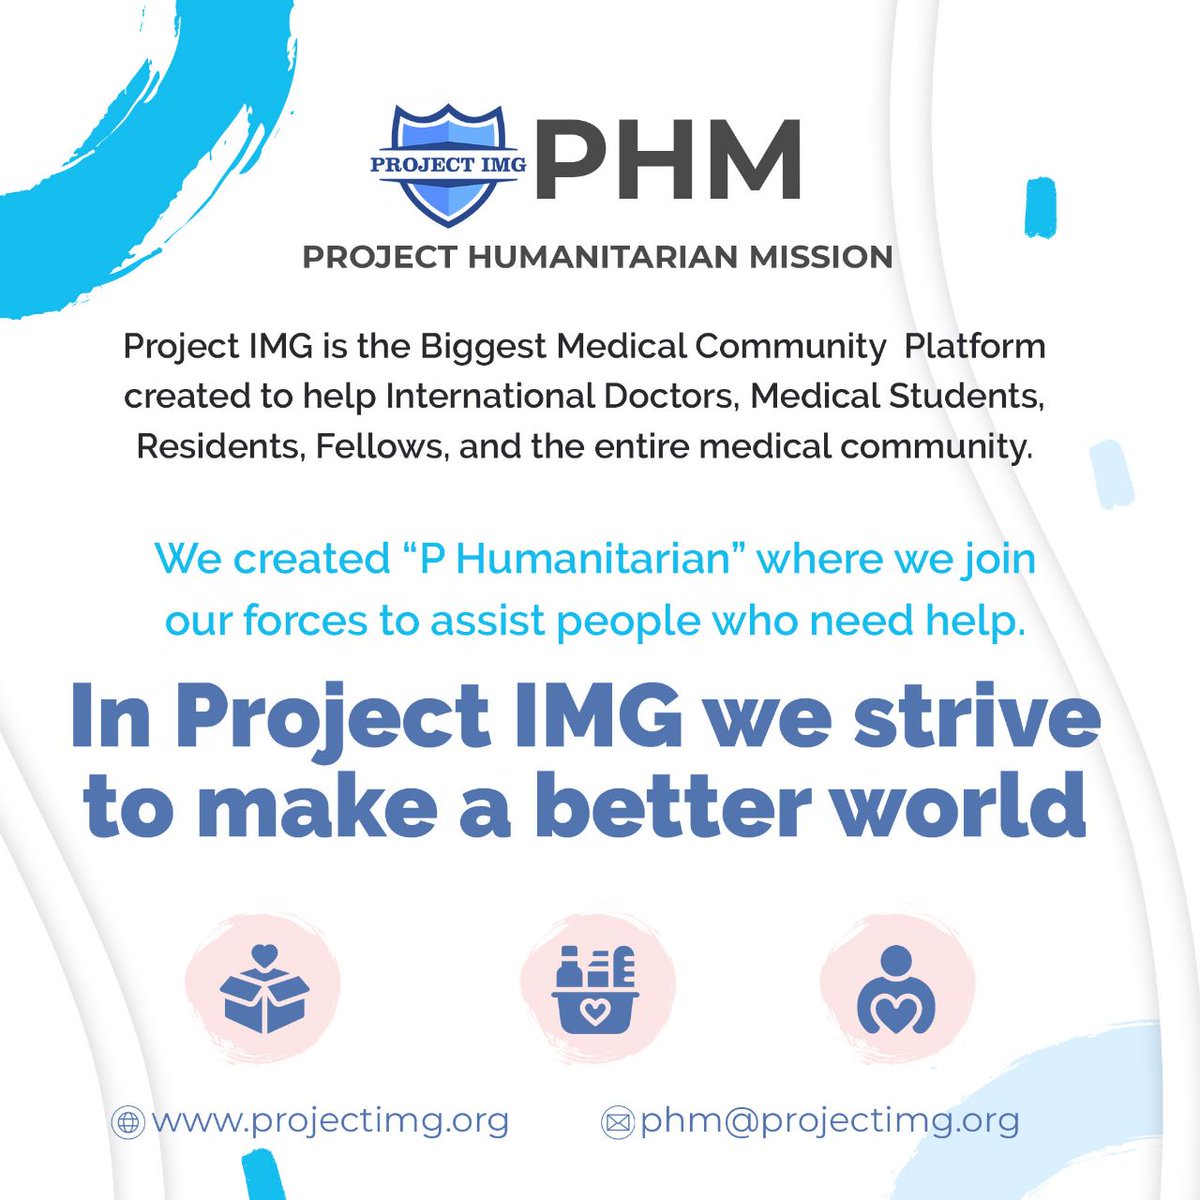 Welcome to Project Humanitarian Mission, another Project IMG platform! We created “P Humanarian” where we join our forces to assist people who need help. If you wanna be part of PHM send us an email to phm@projectimg.org Visit projectimg.org to view all campaigns.